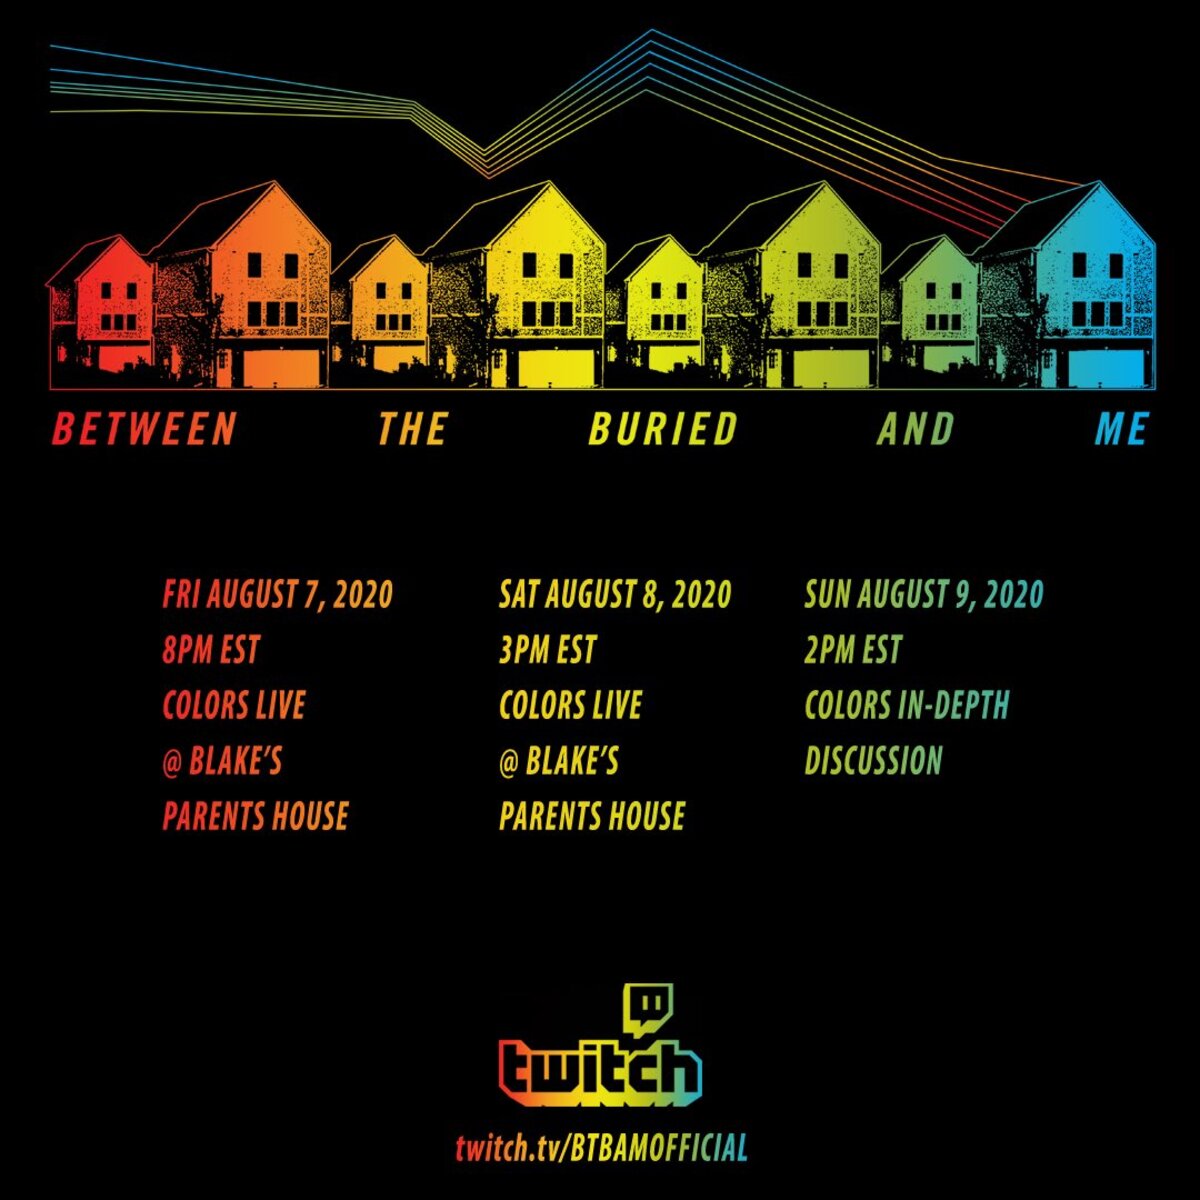 Between The Buried And Me 4thアルバム Colors 再現ライヴを今週末にtwitchにて配信 激ロック ニュース